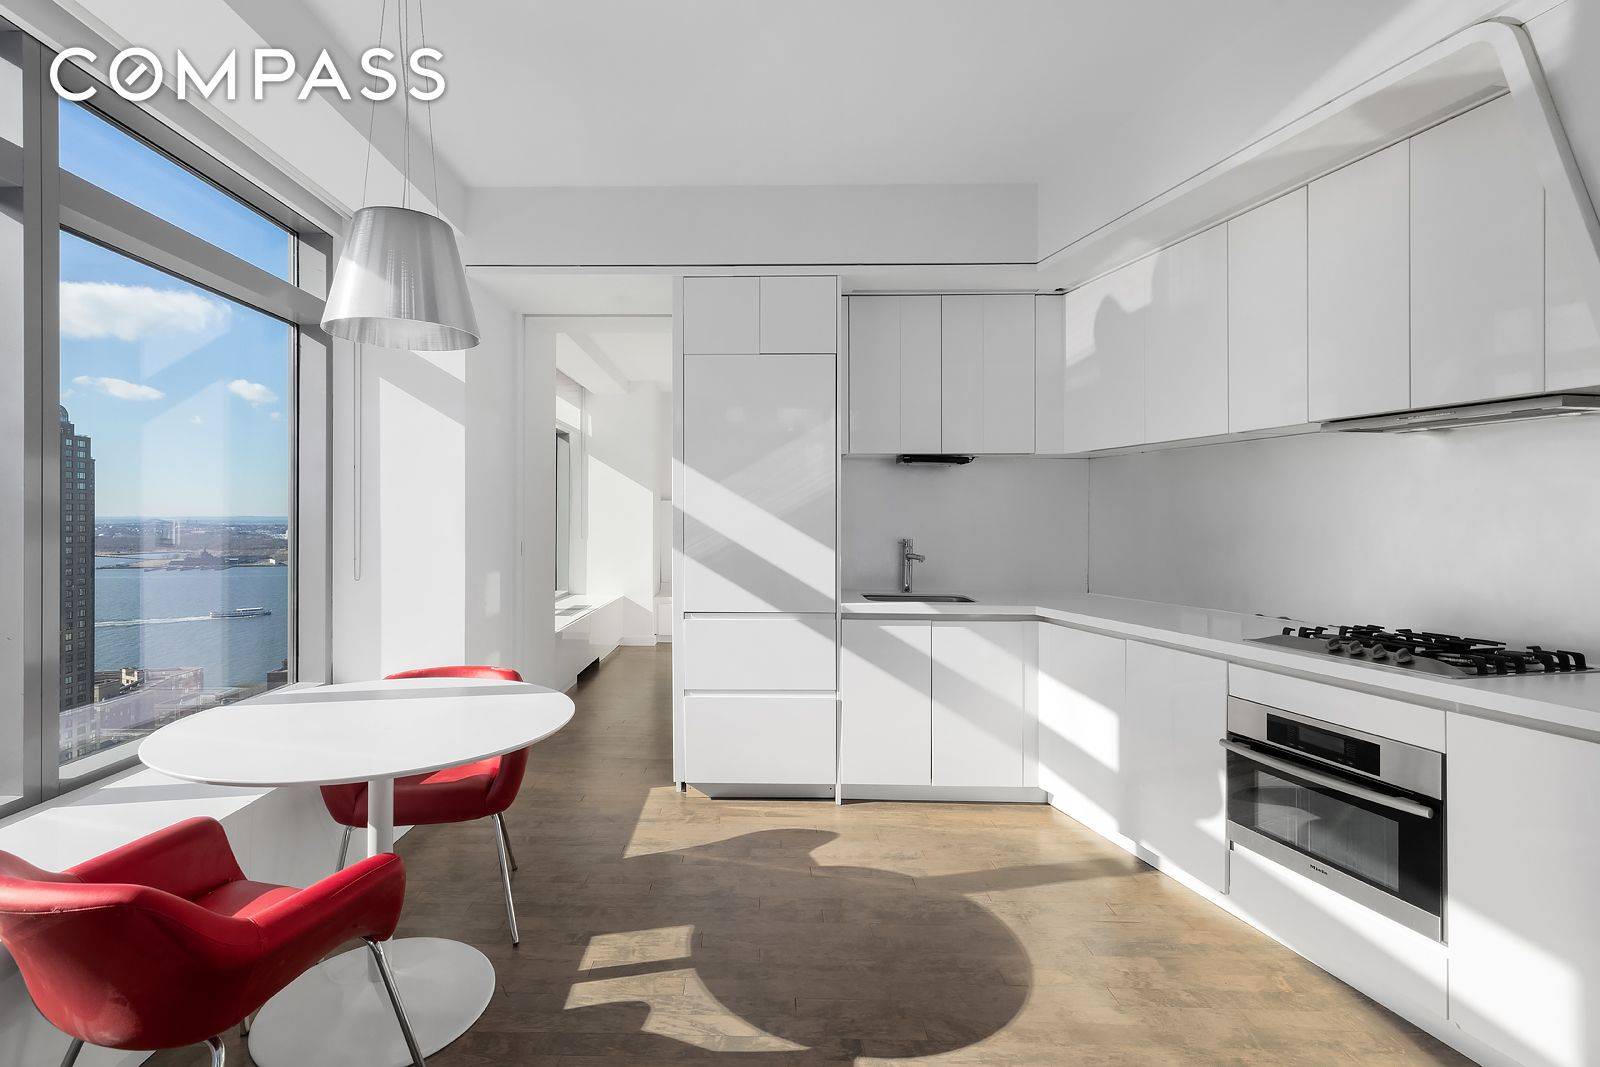 Located on the thirtieth floor of the building, this newly renovated one bedroom boasts unobstructed views of New York s most iconic buildings.